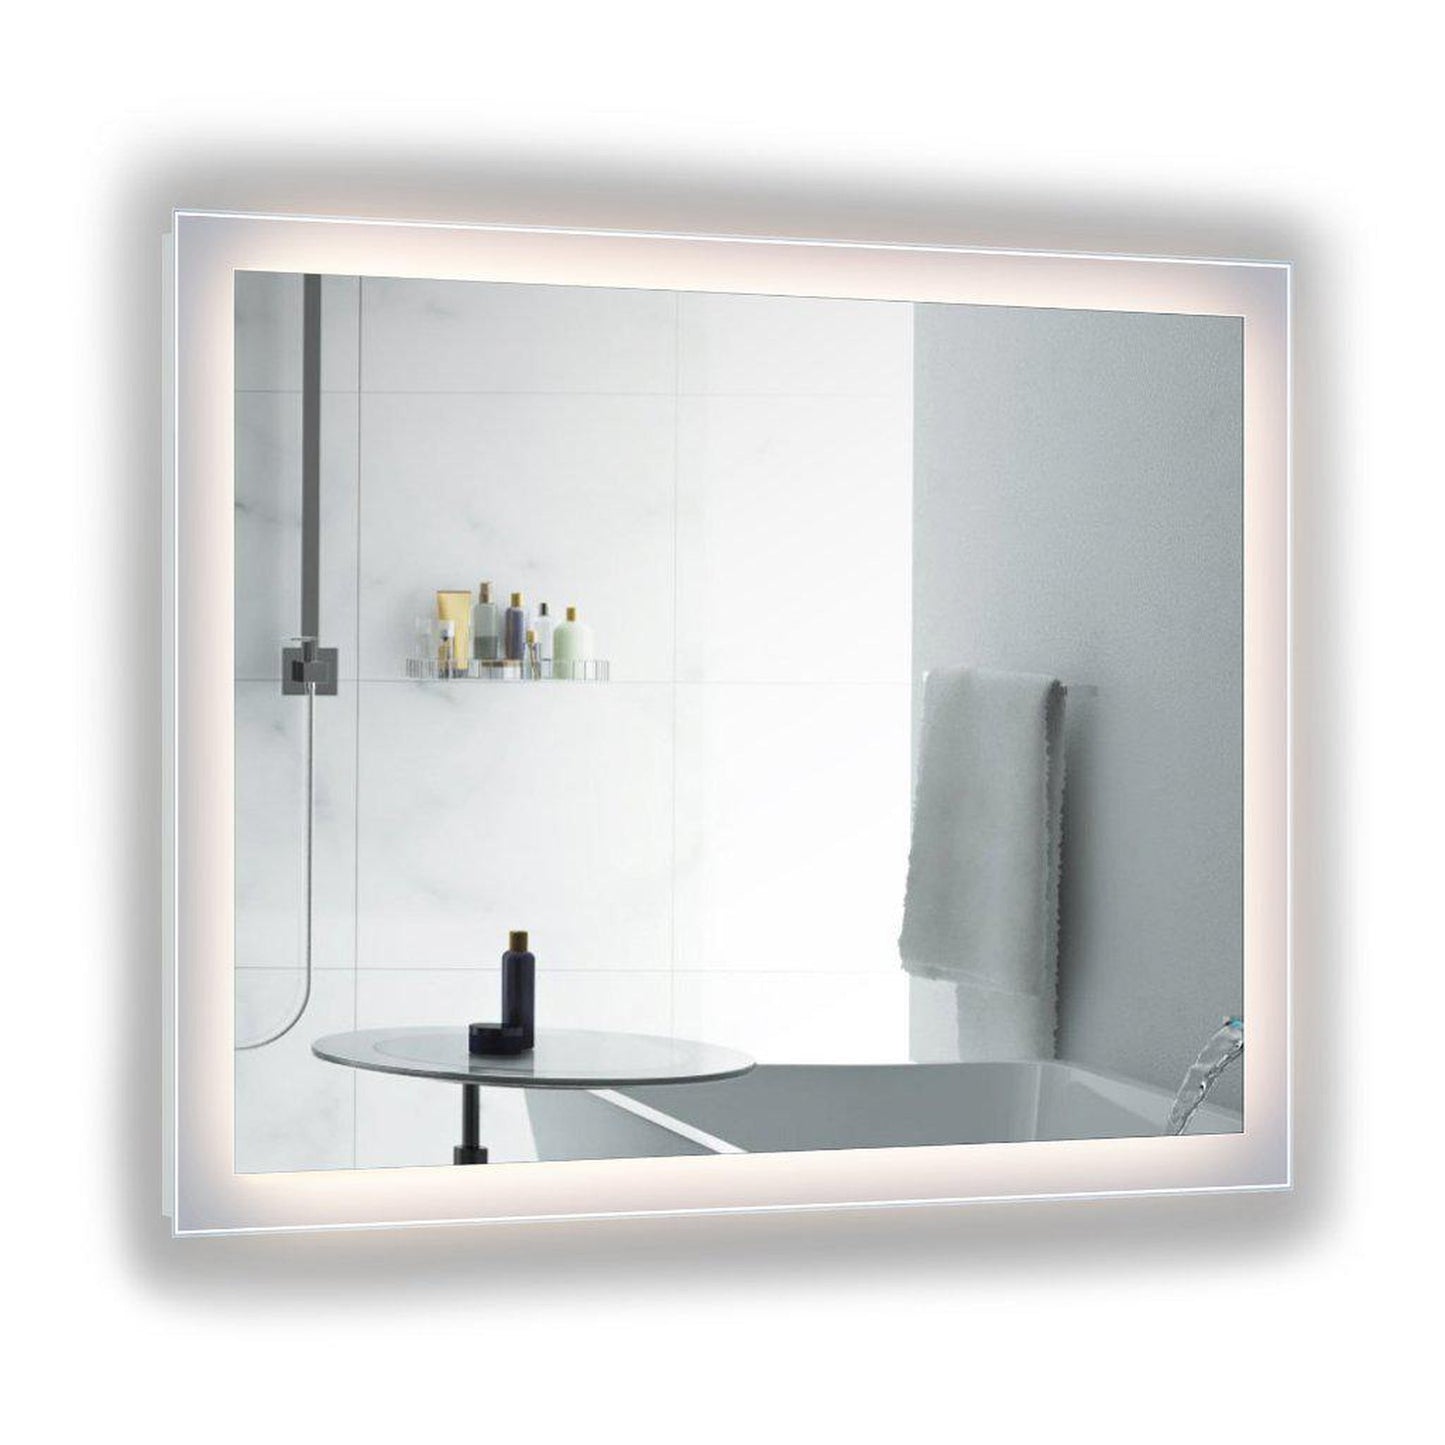 Krugg Reflections Stella 48" x 36" 5000K Rectangular Wall-Mounted Silver-Backed LED Bathroom Vanity Mirror With Built-in Defogger and Dimmer